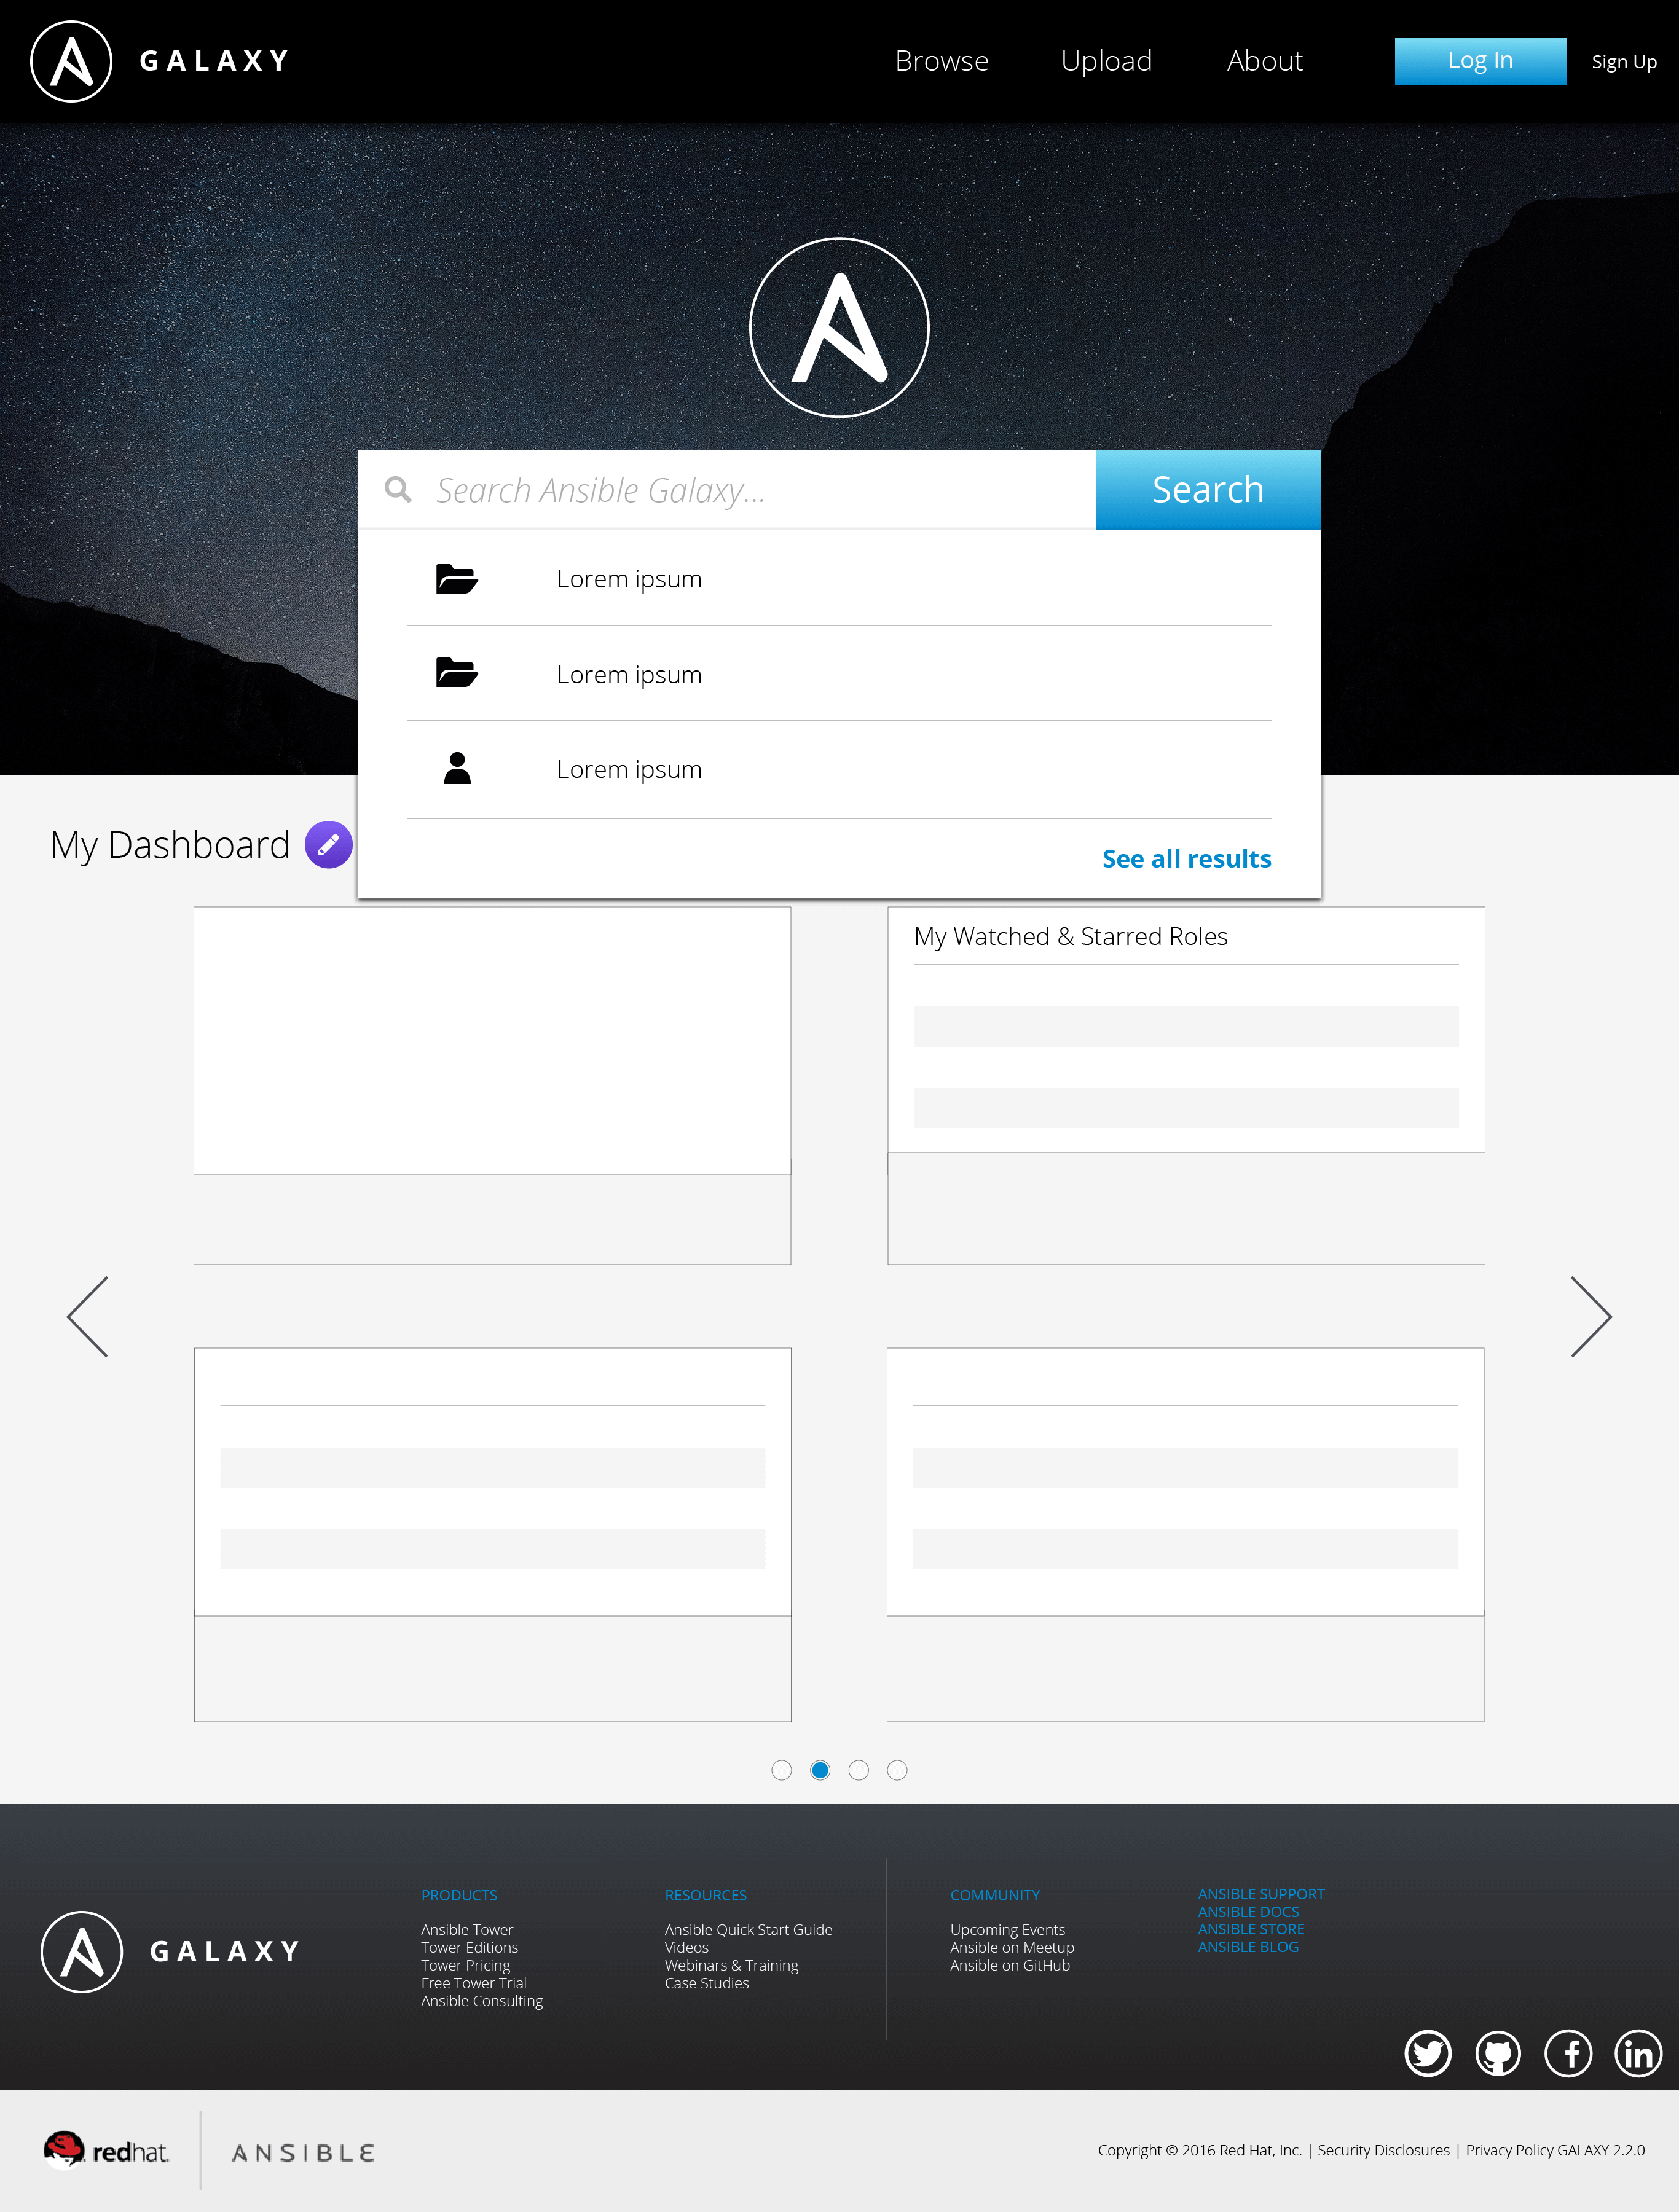 Redesign Home Screen of Ansible Galaxy